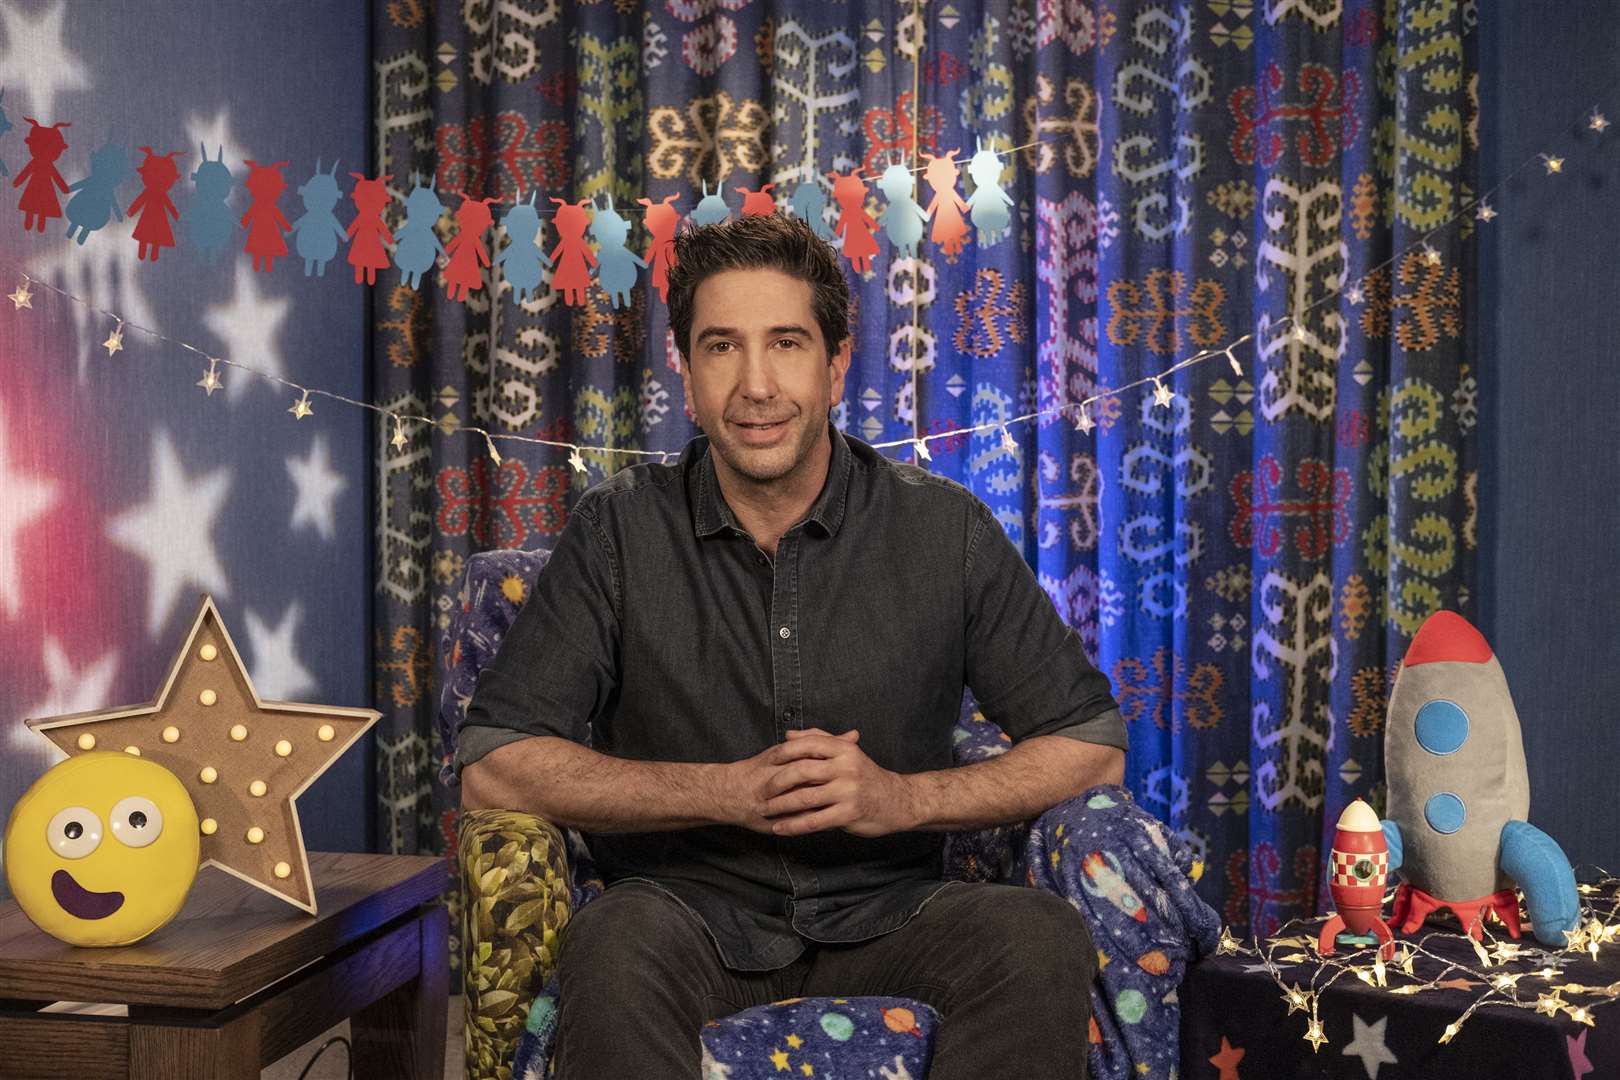 Friends actor David Schwimmer will read this Saturday's bedtime story. Credit: CBeebies Bedtime Stories.